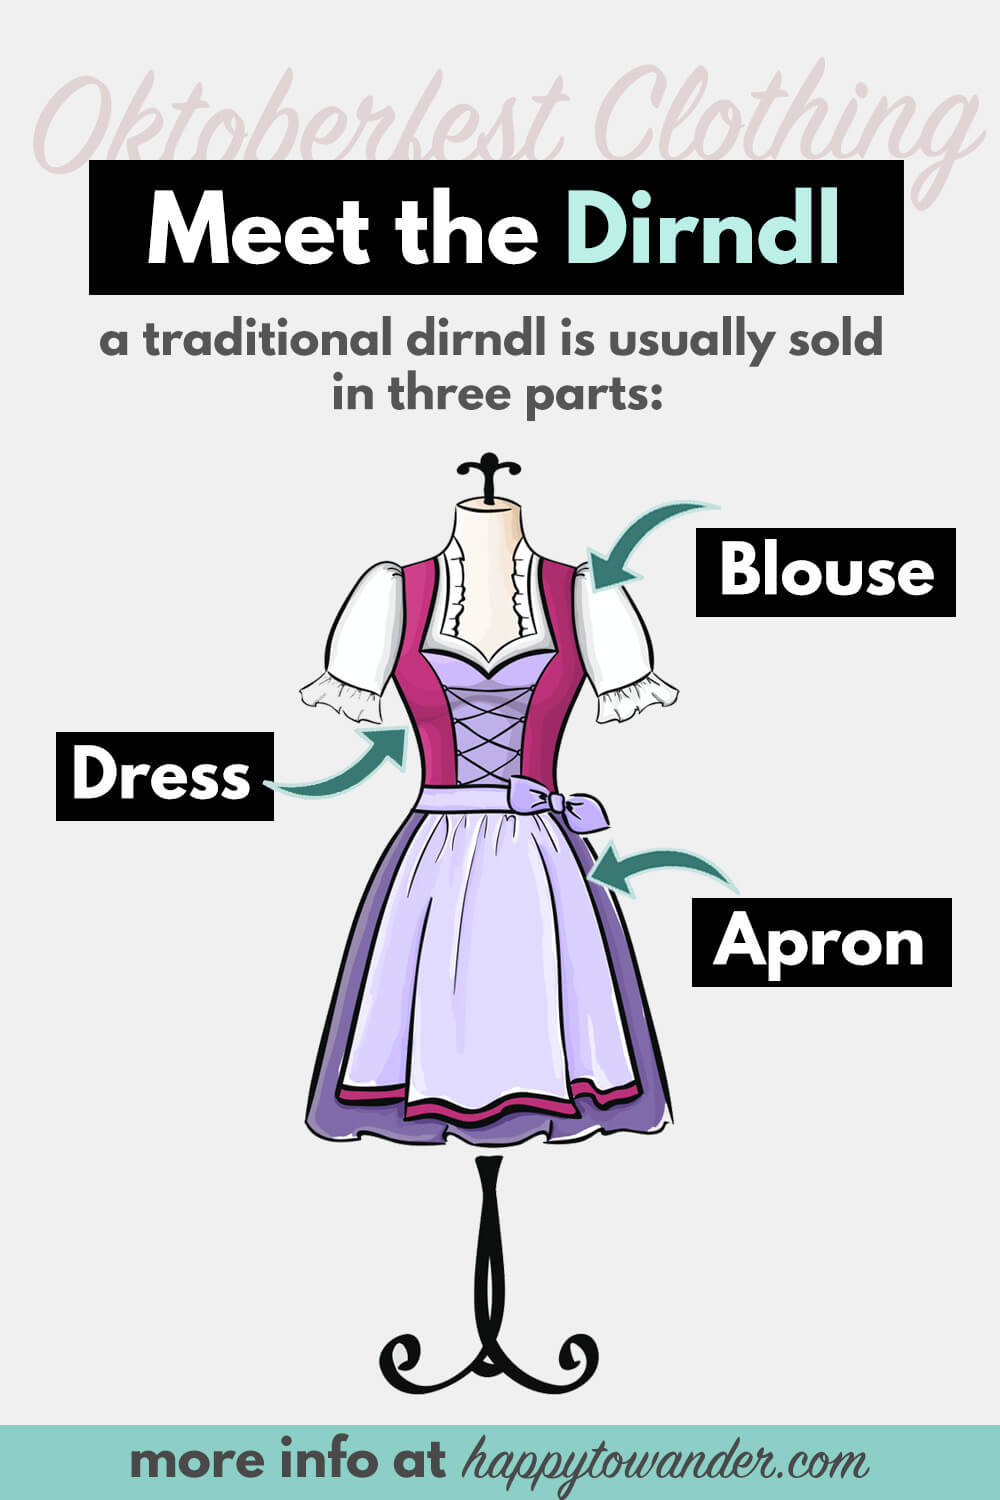 Cute graphic illustrating the different components of a dirndl, a traditional dress worn in Southern Germany and Austria.